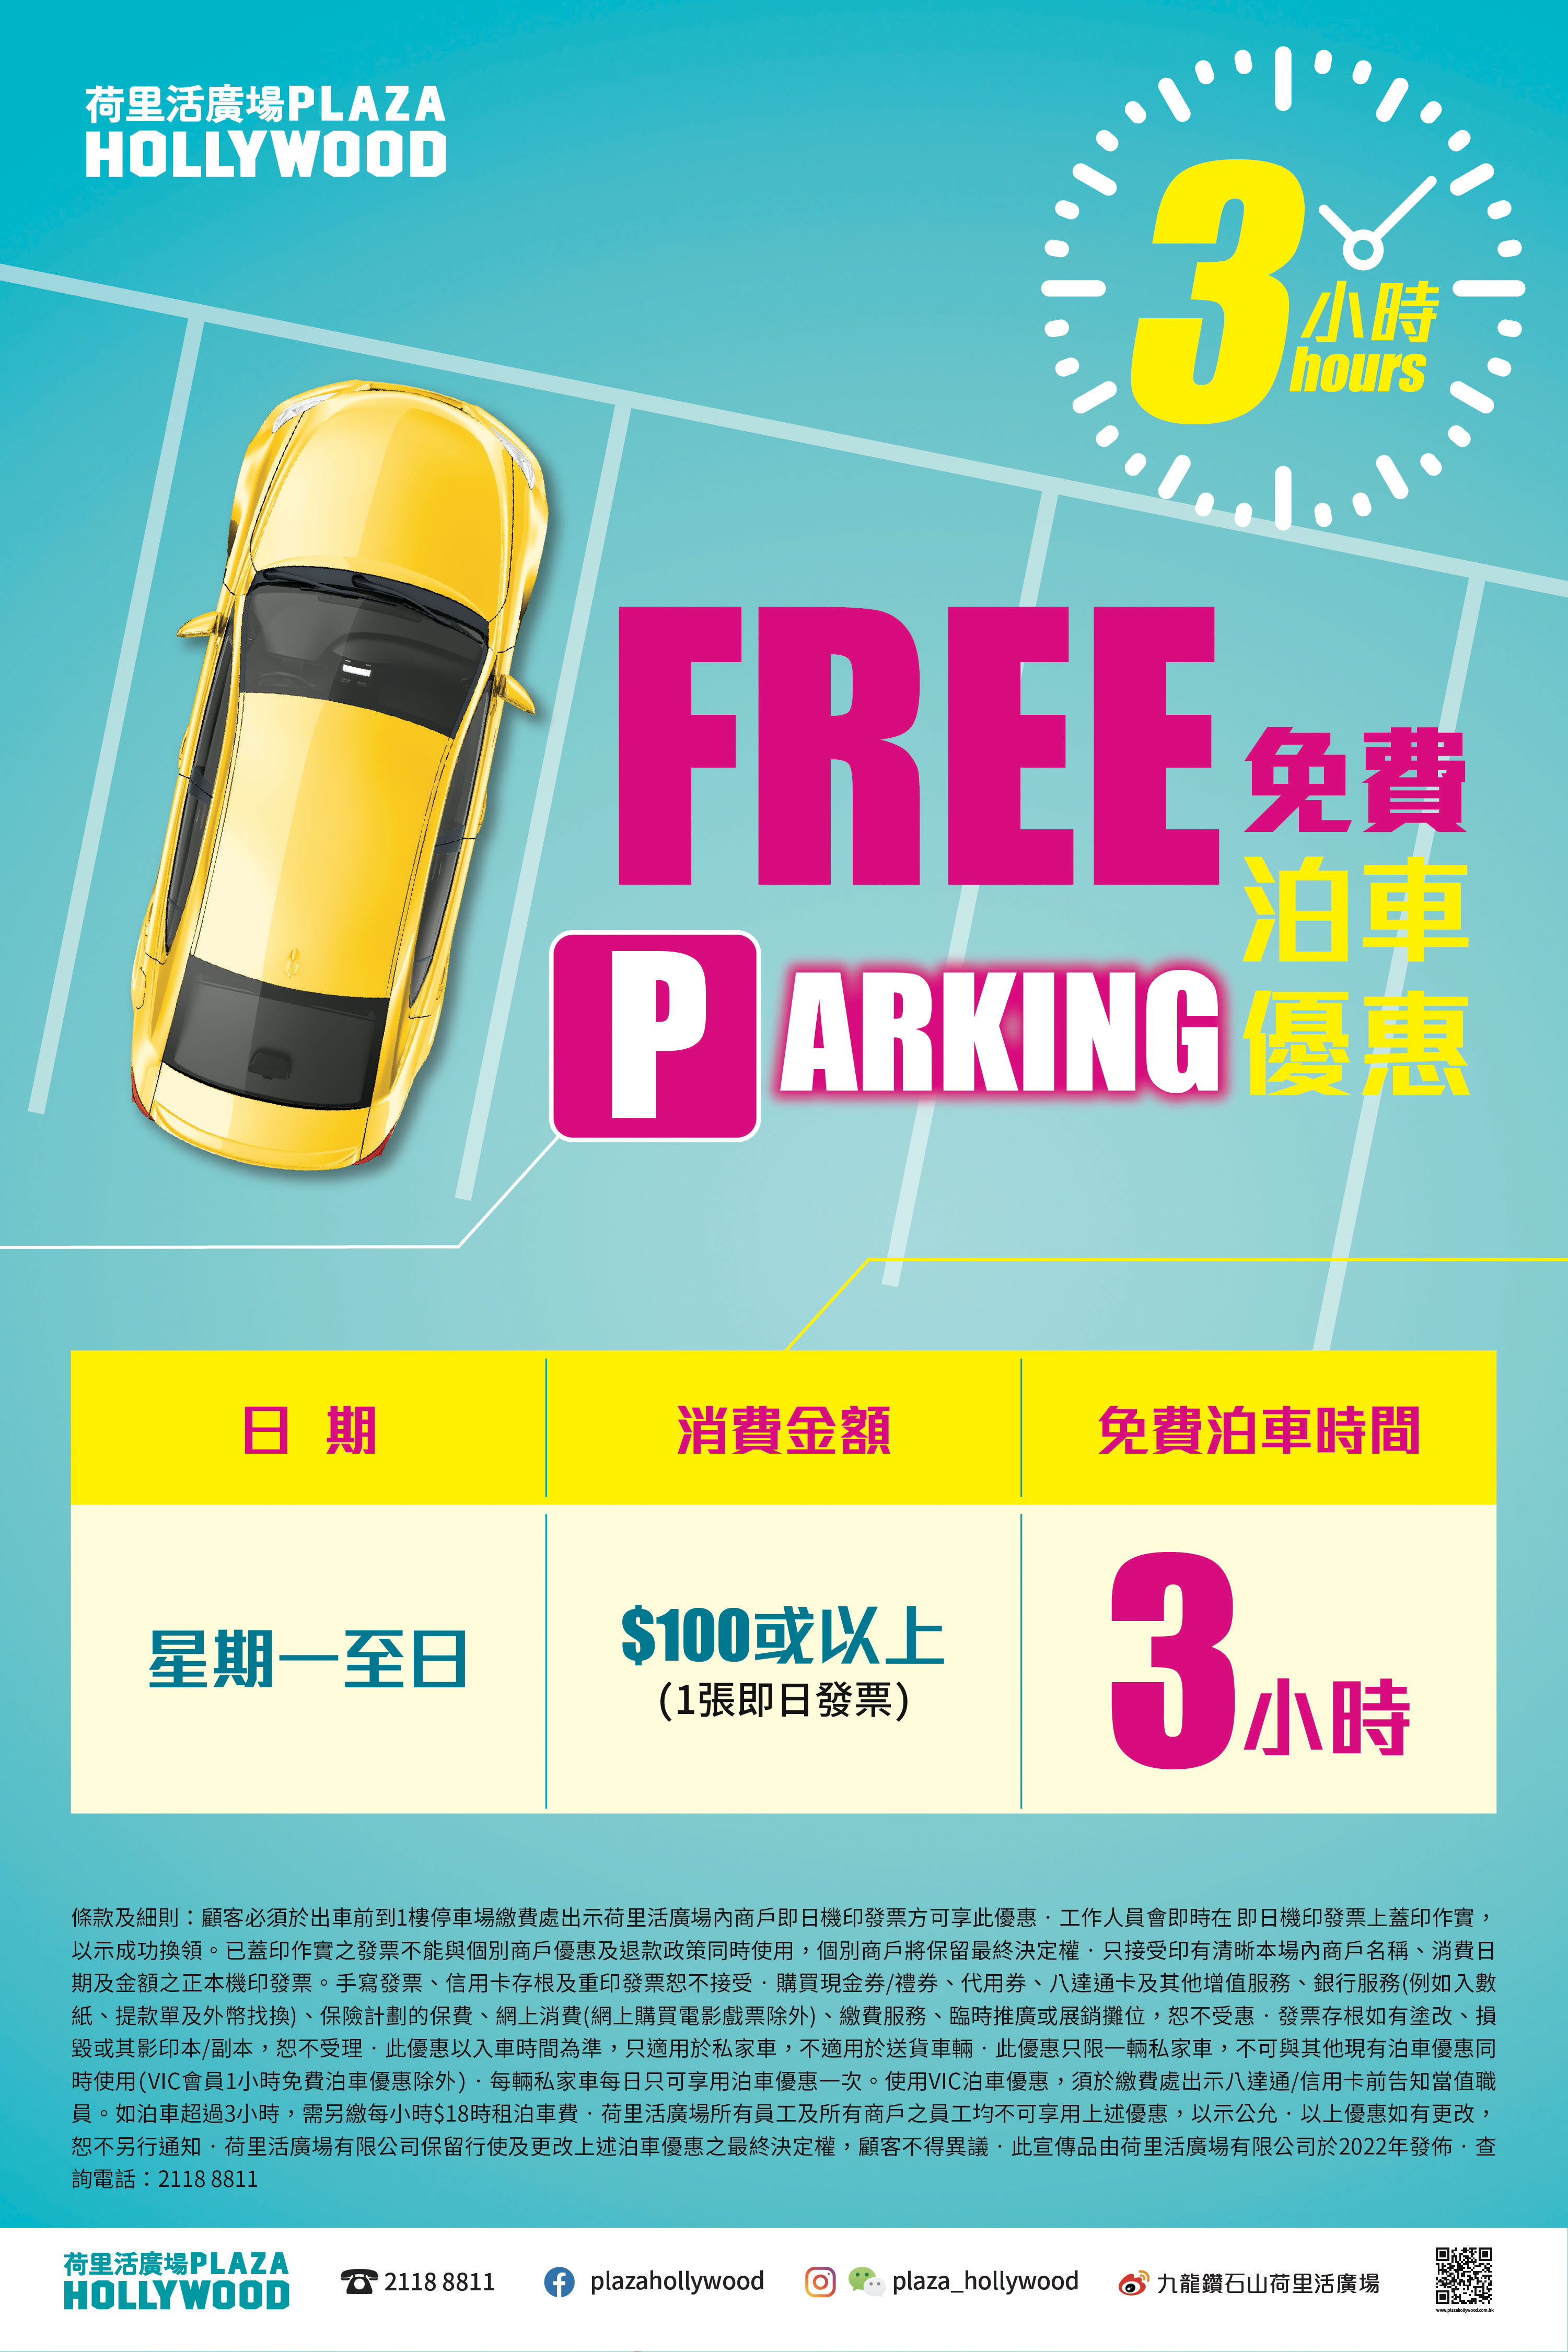 3 Hours Complementary FREE Parking